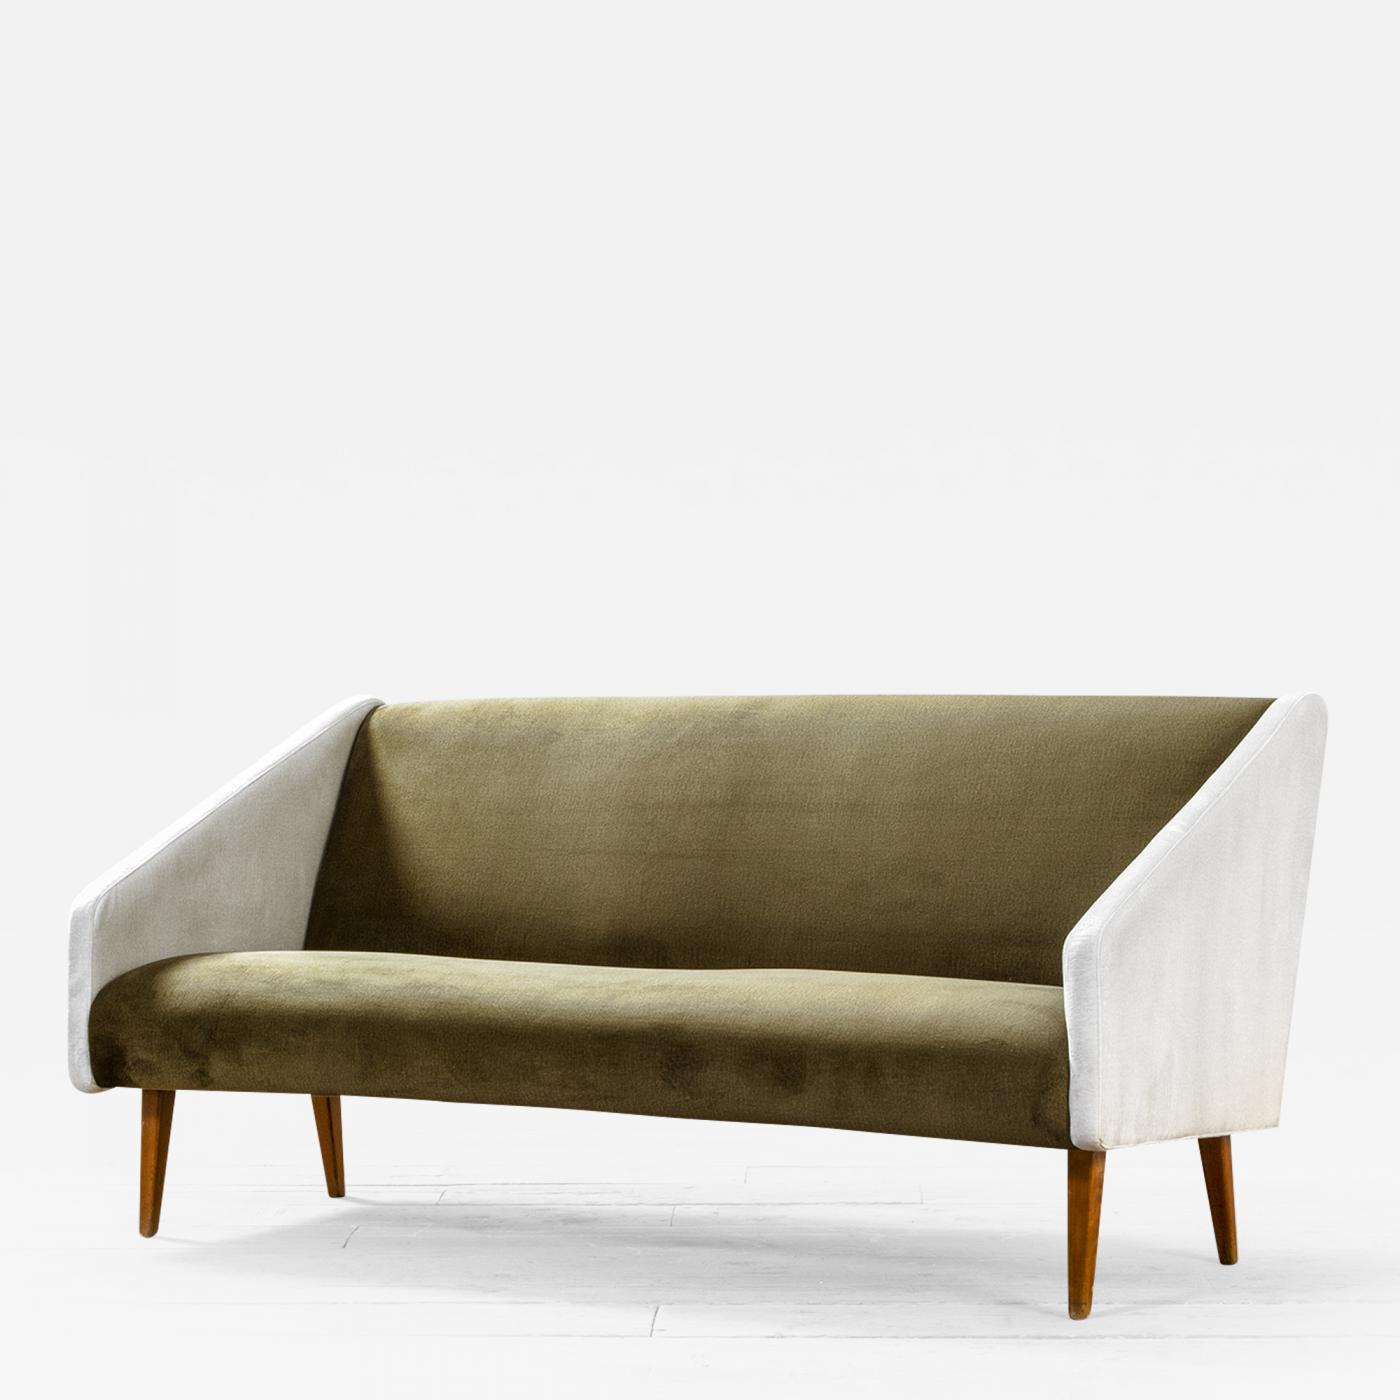 Traditioneel Retoucheren voorjaar Gio Ponti - Gio Ponti Sofa 'Attributed' in Wood and Upholstery in Fabric,  '50s